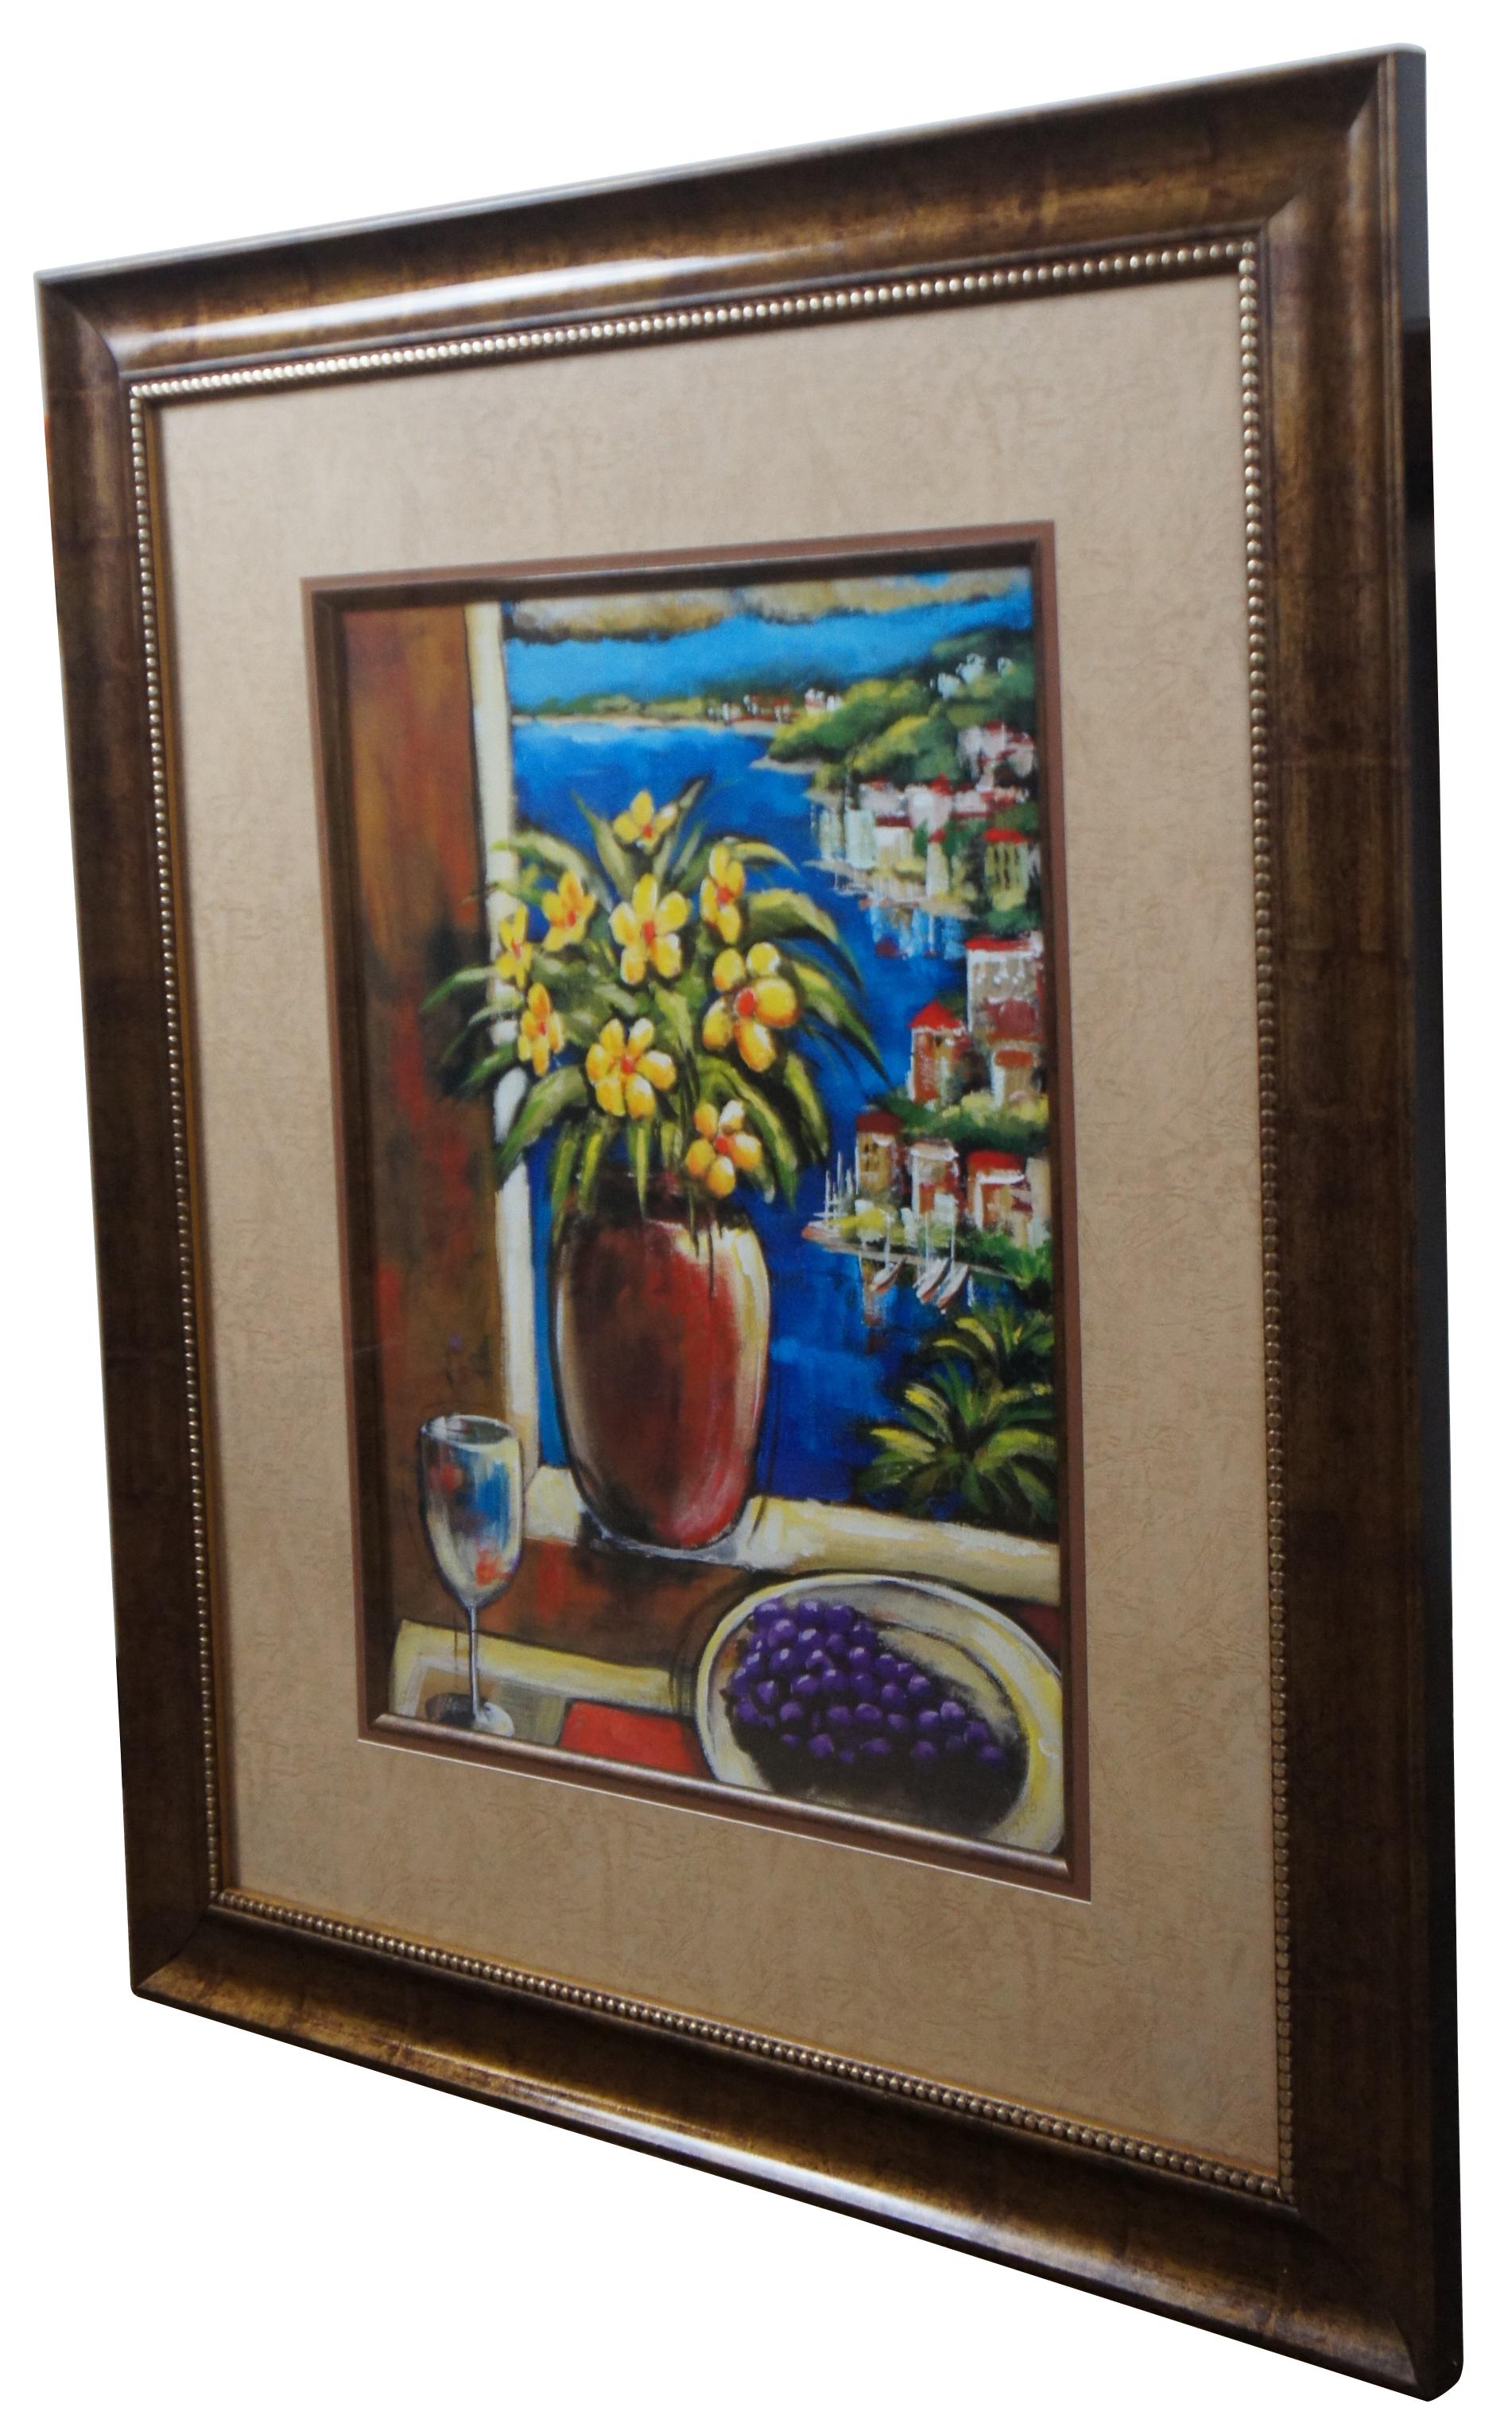 Elegantly framed still life print by Pate showing a plate of grapes and wine glass in front of a vase of yellow flowers in a window showing a coastal landscape.

Measures: 31.5” x 1” x 37.5” / Sans frame - 16.5” x 22.5” (Width x Depth x Height).